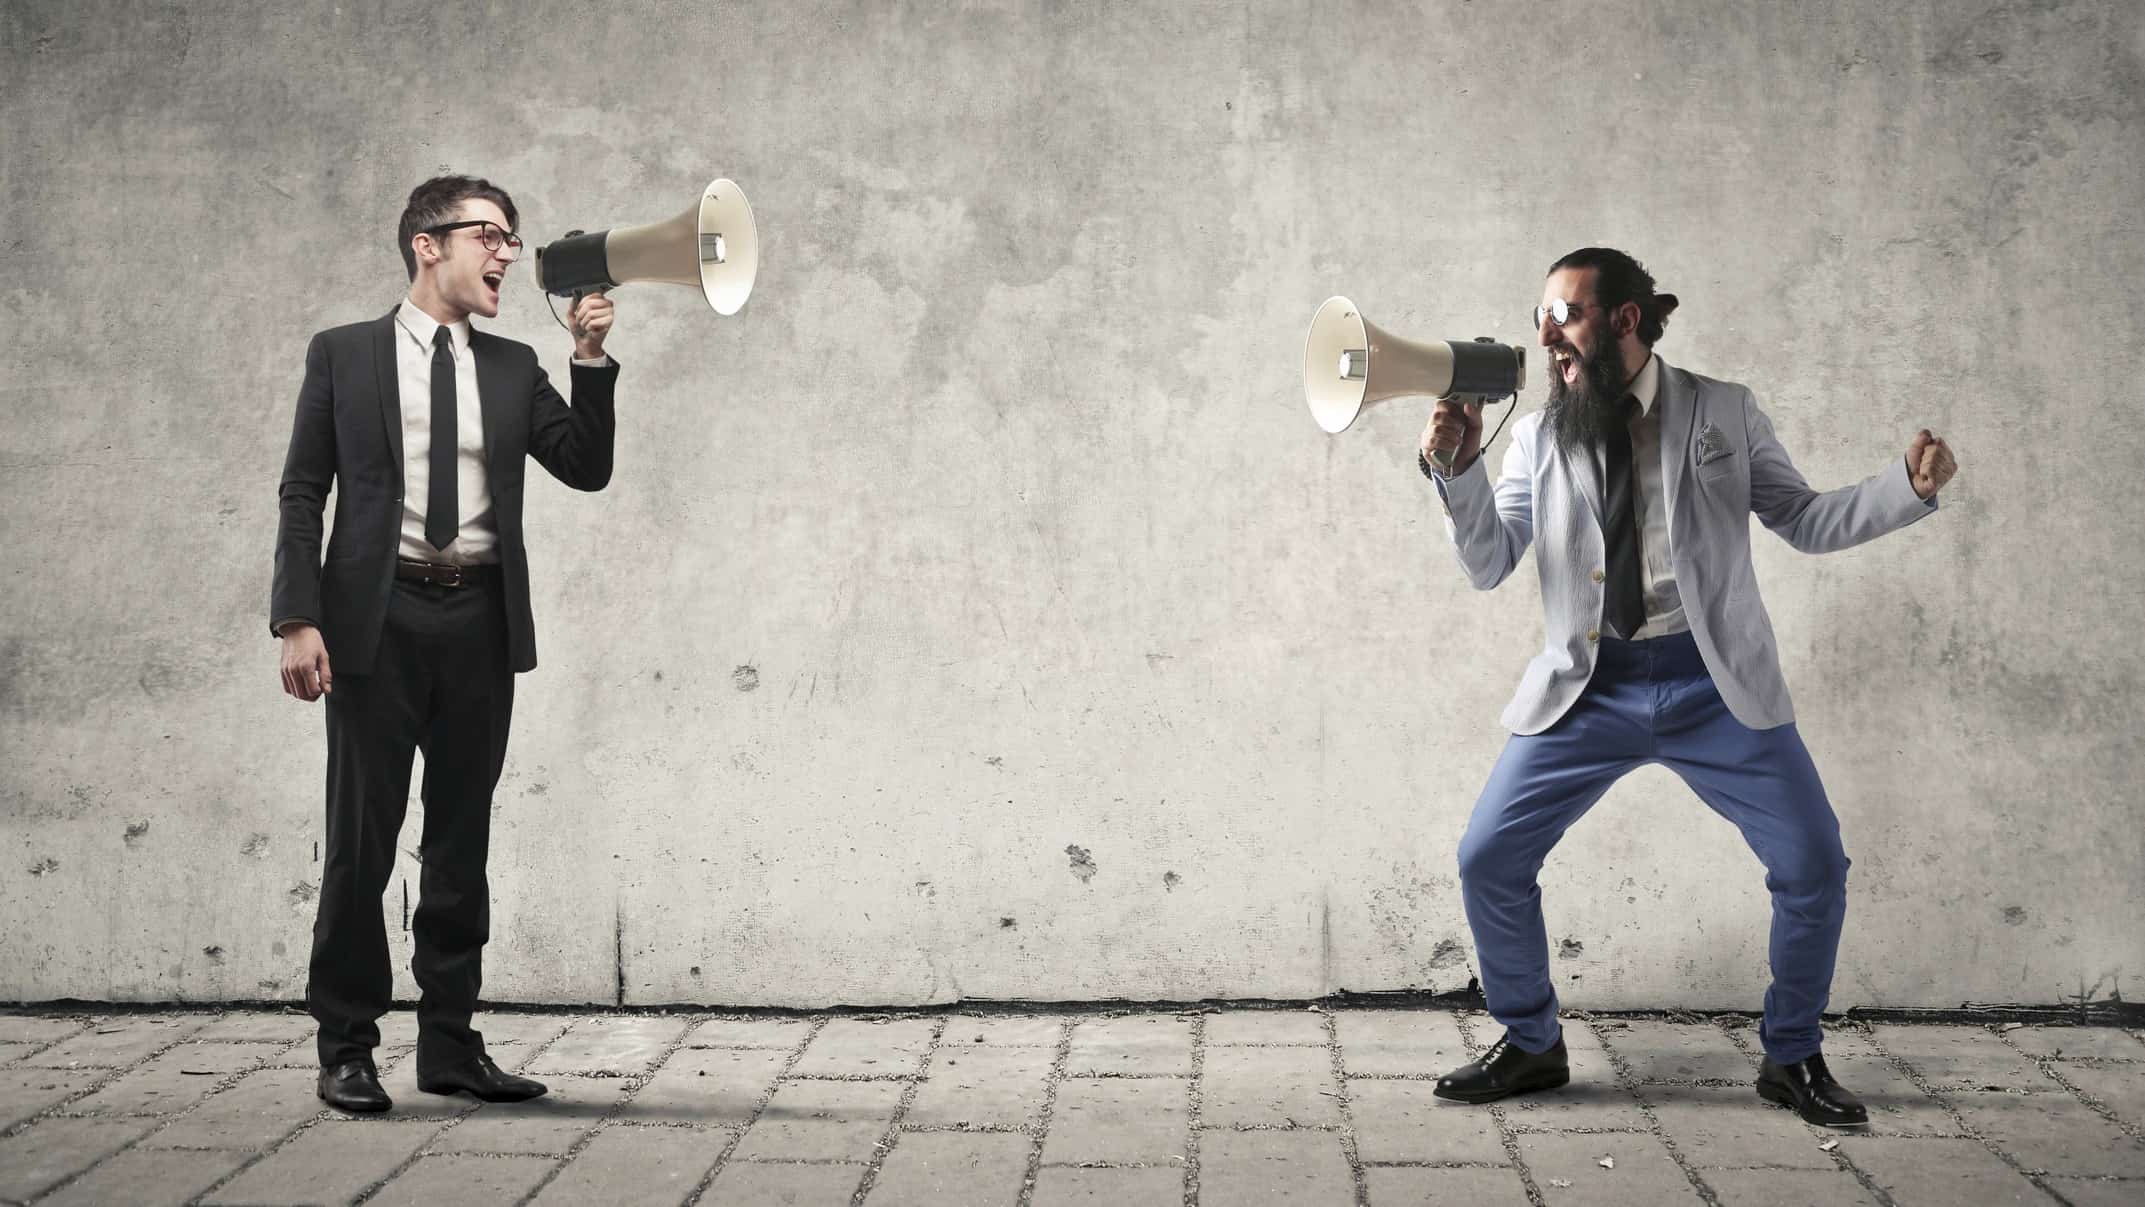 A corporate guy and an entrepreneurial guy face off, using megaphones to shout at each other.